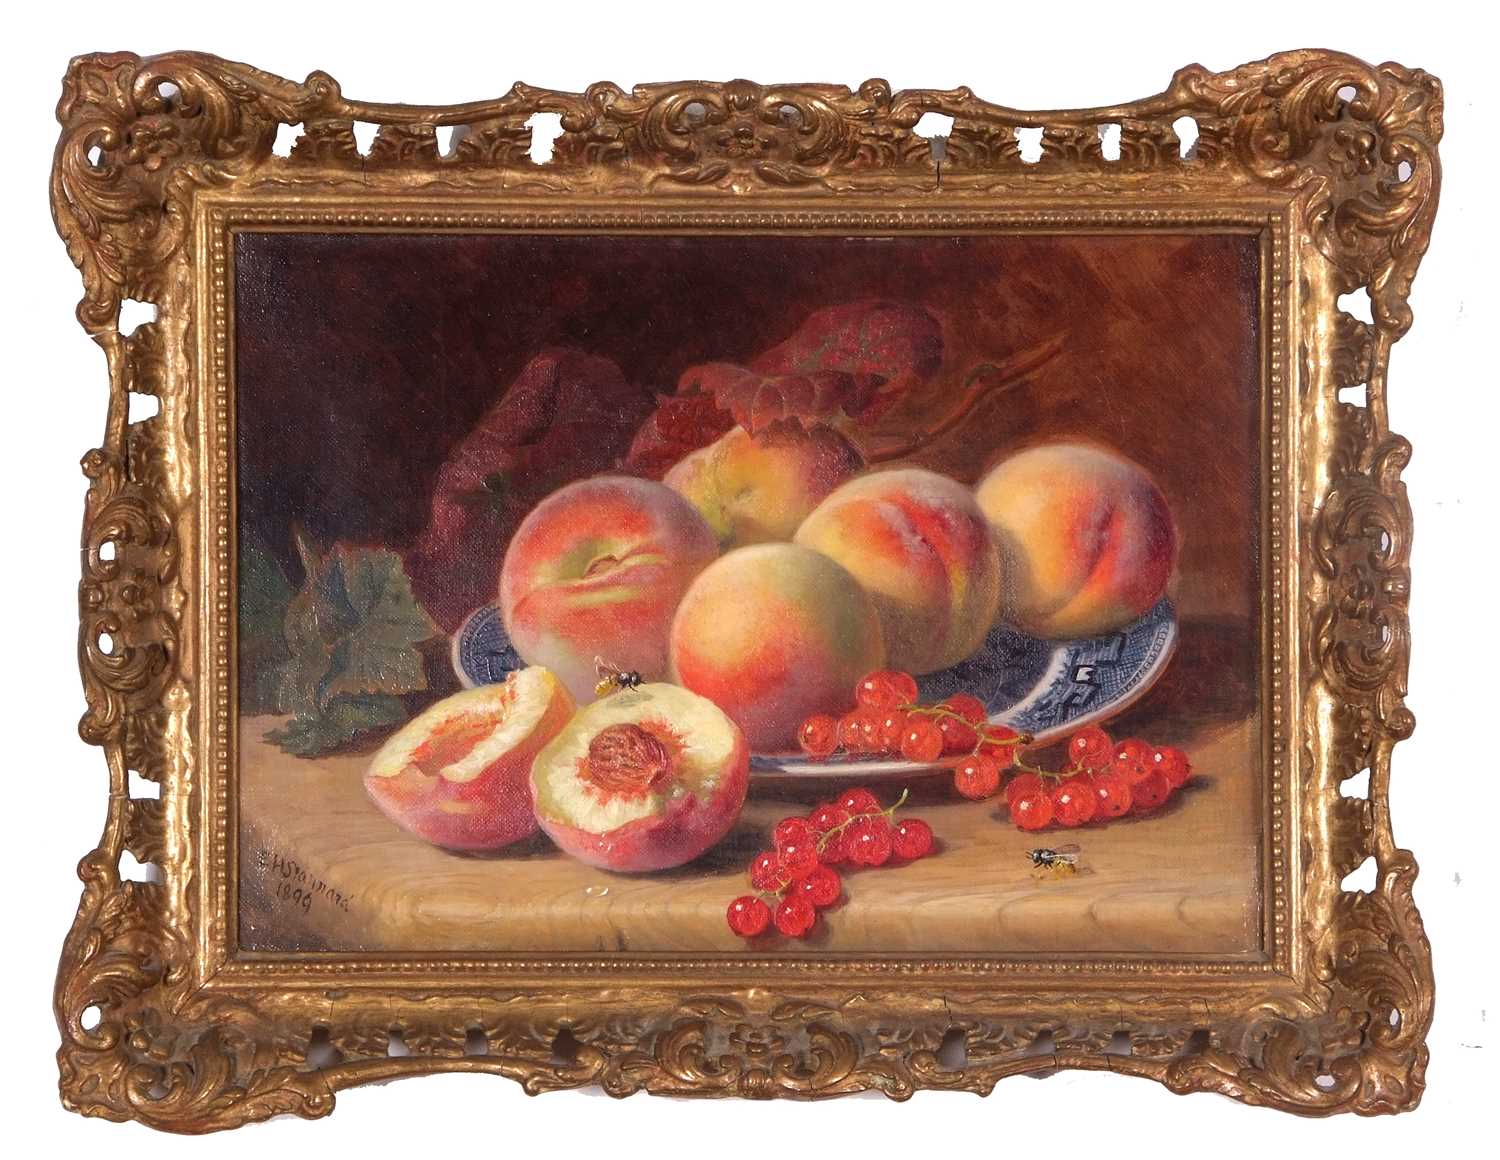 Eloise Harriet Stannard (1829-1915) Pair of still life studies of peaches and red currants on willow - Image 10 of 11